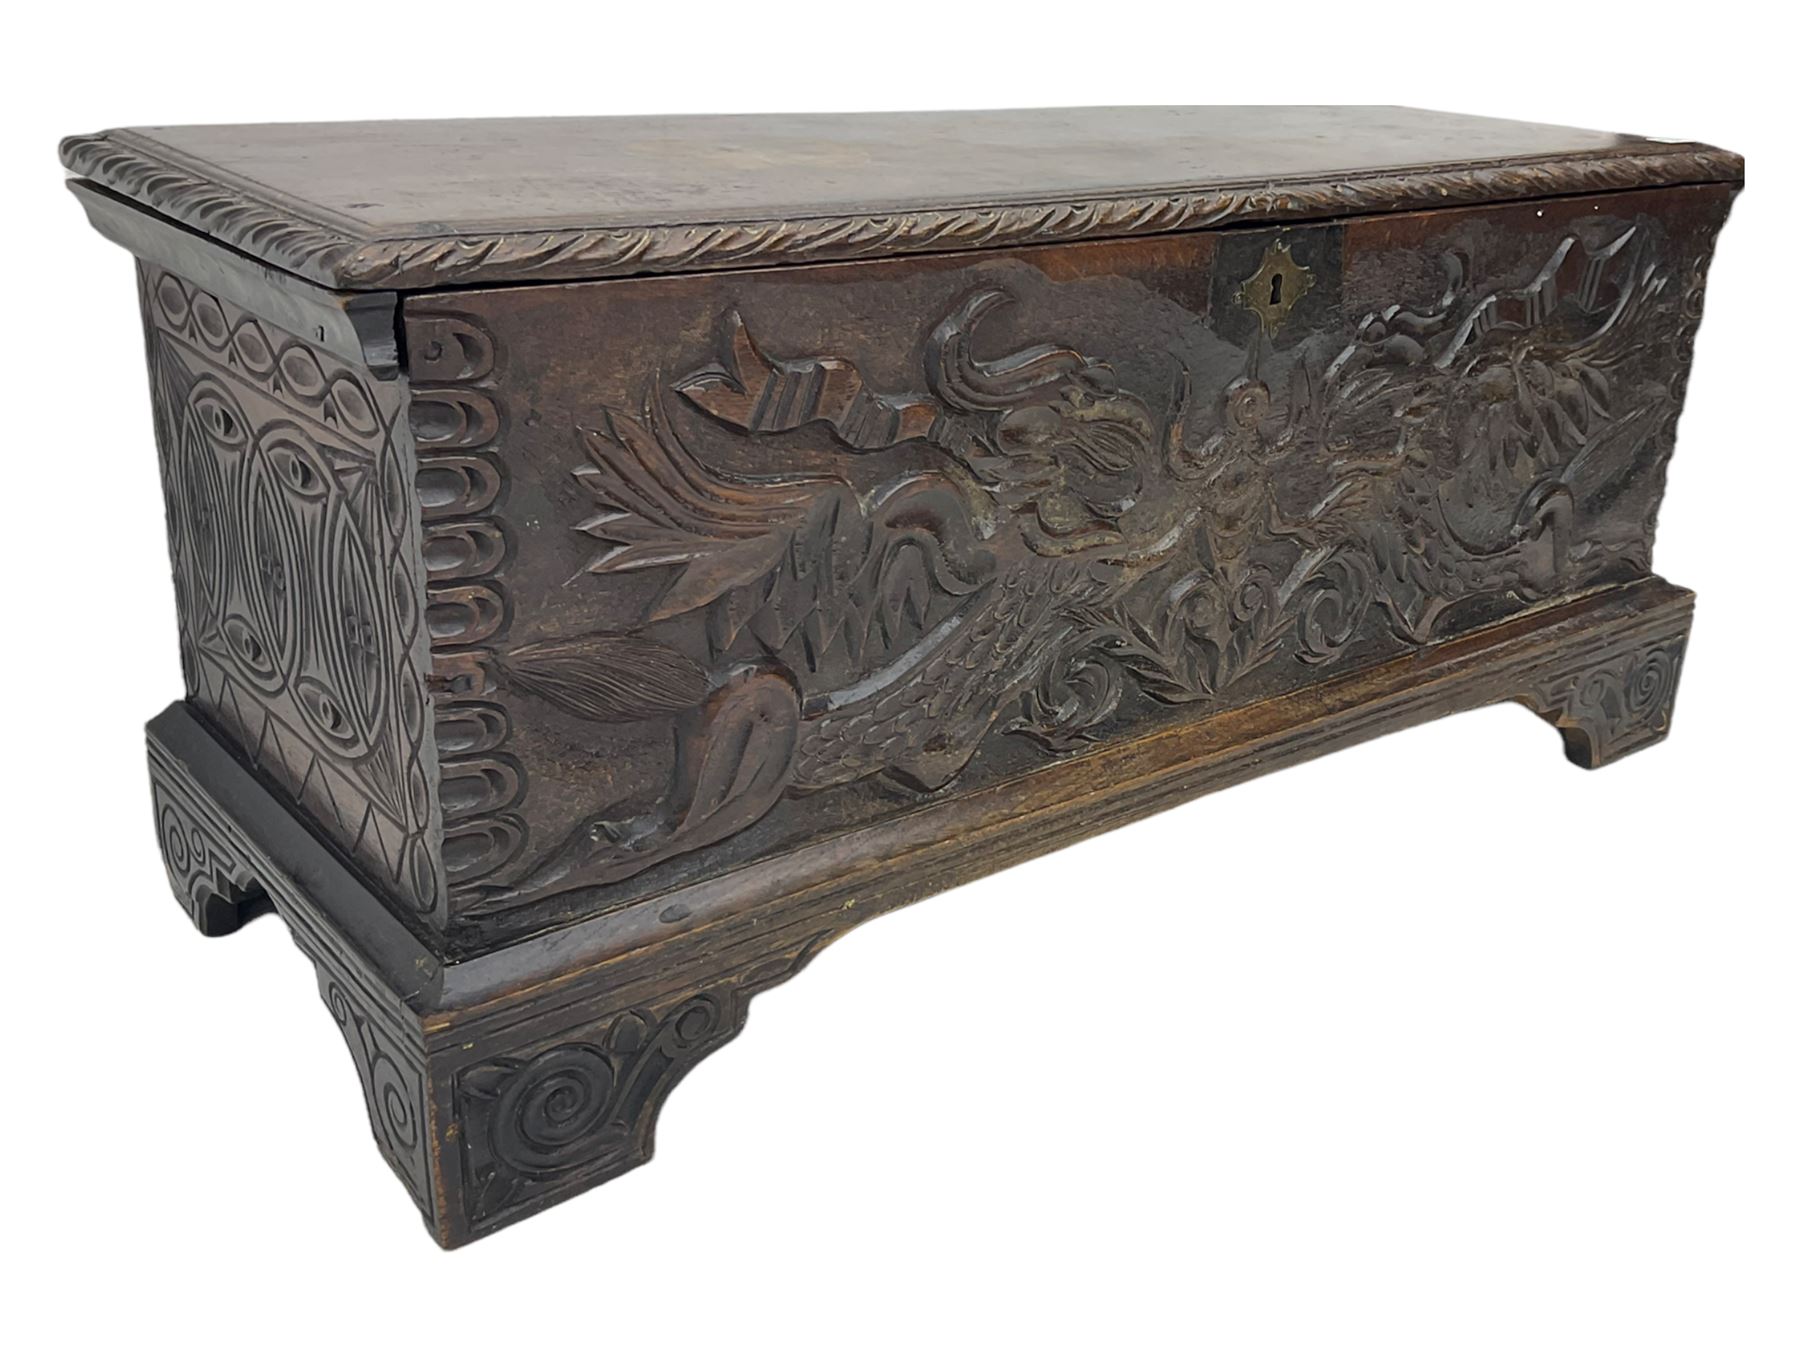 18th century carved oak blanket box - Image 4 of 9